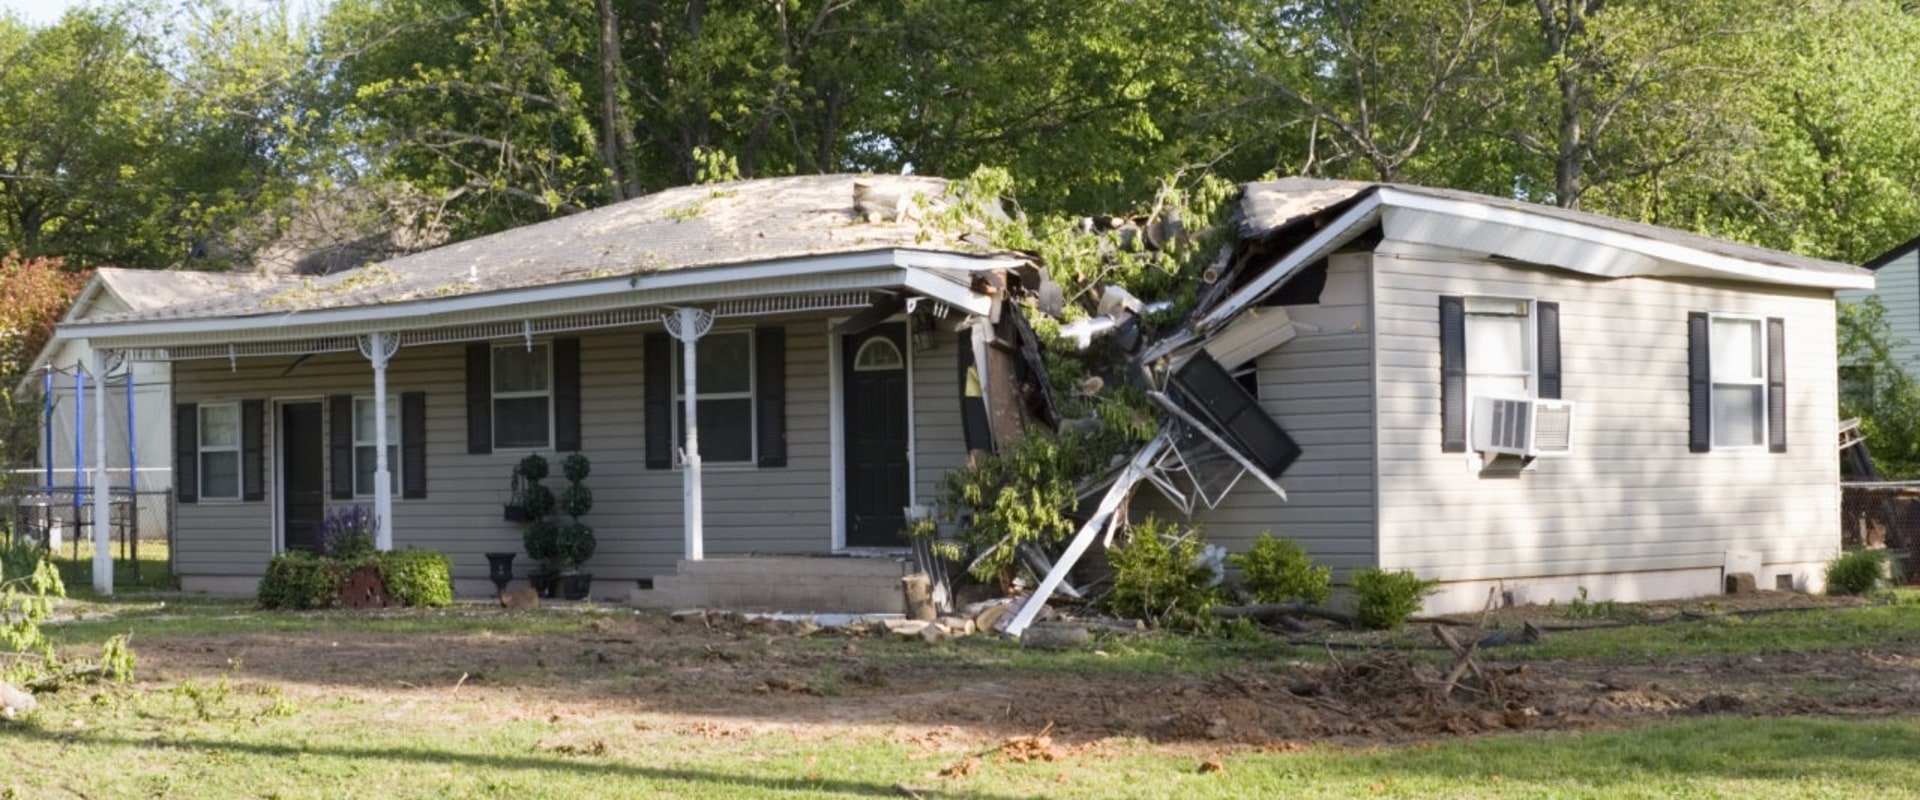 What is not usually covered by homeowners insurance?